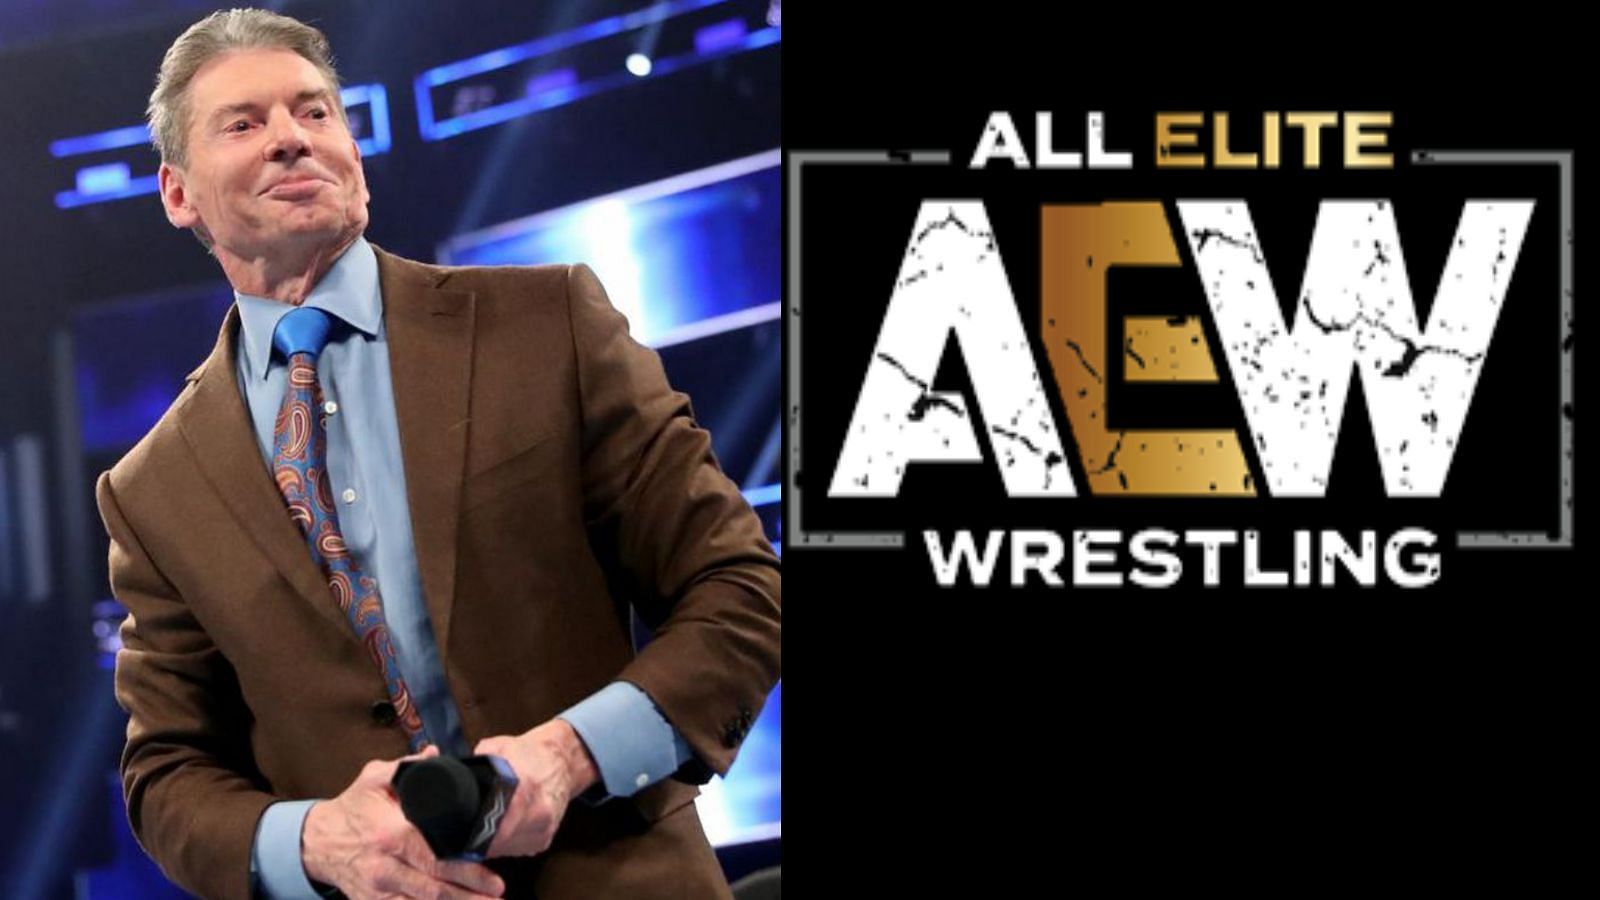 The AEW vs WWE feud has reportedly spilled out.